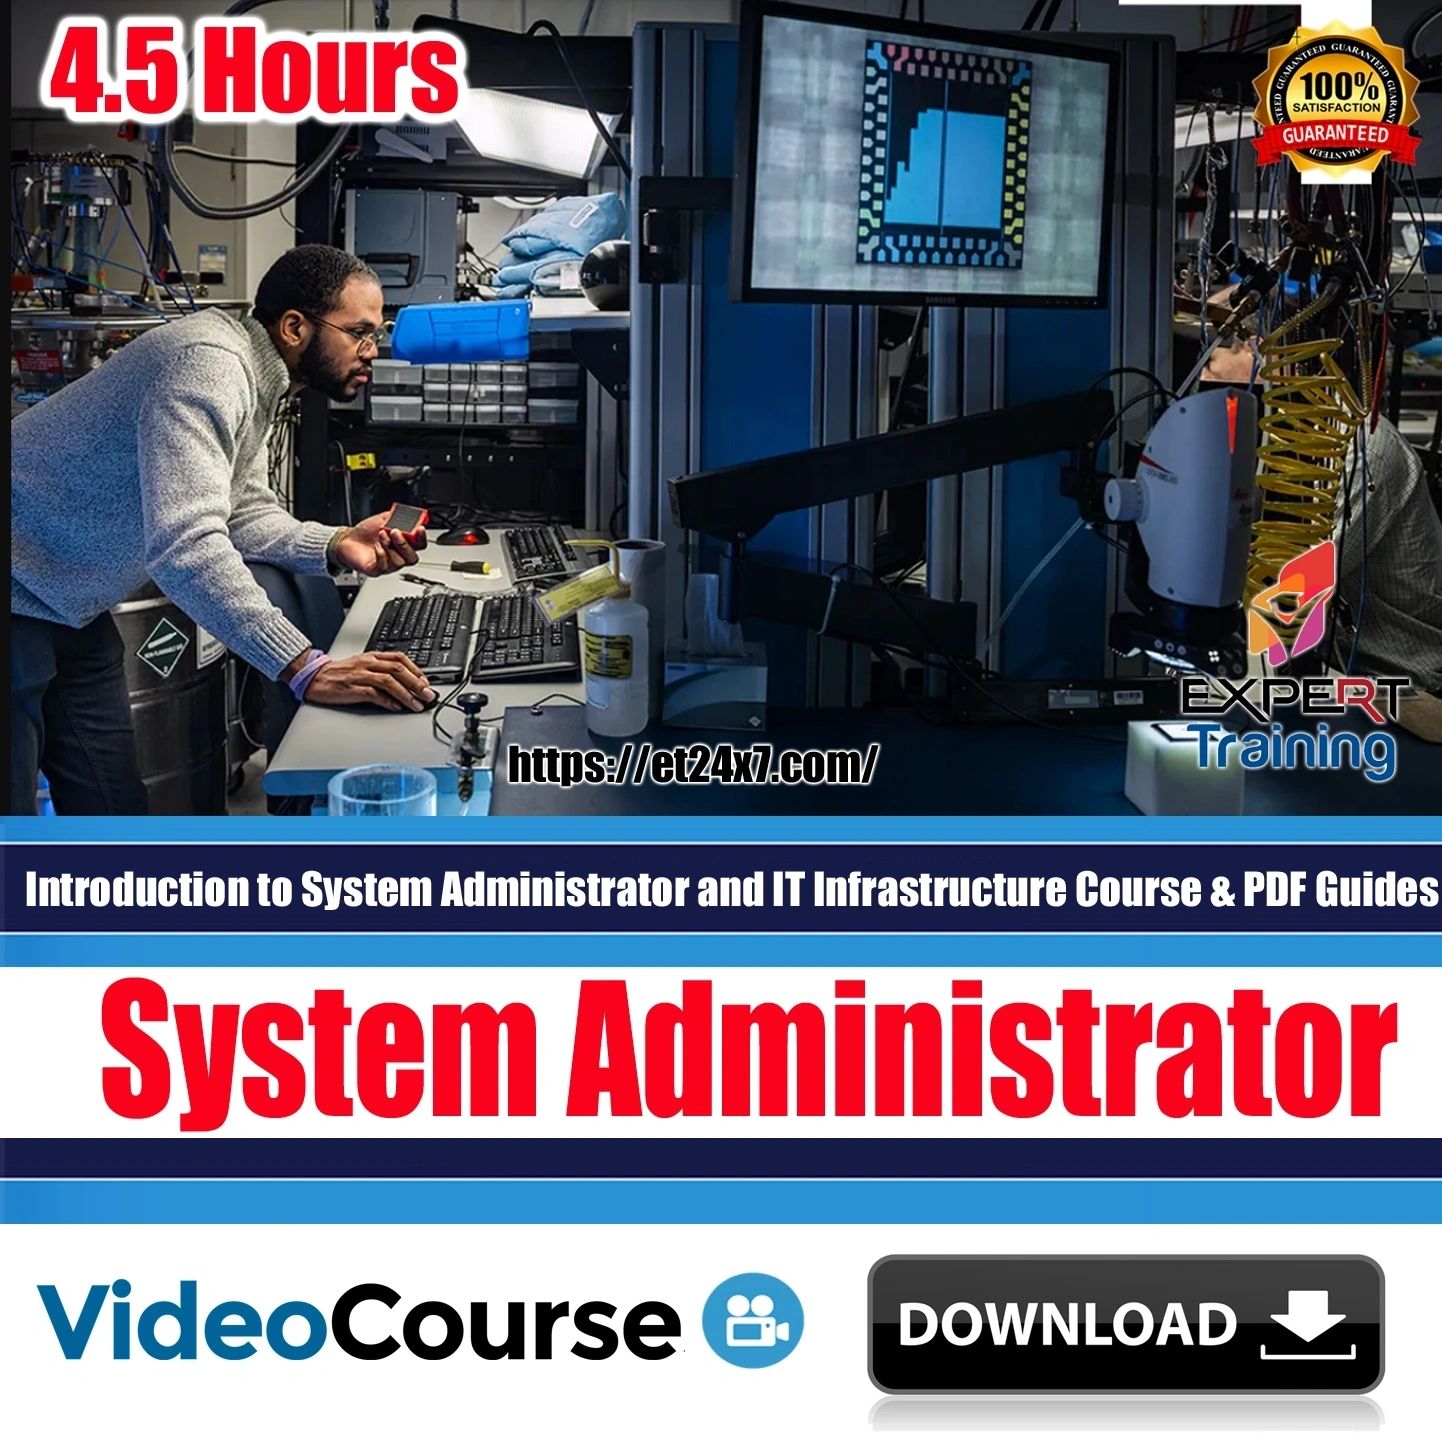 Introduction to System Administrator and IT Infrastructure Course & PDF Guides